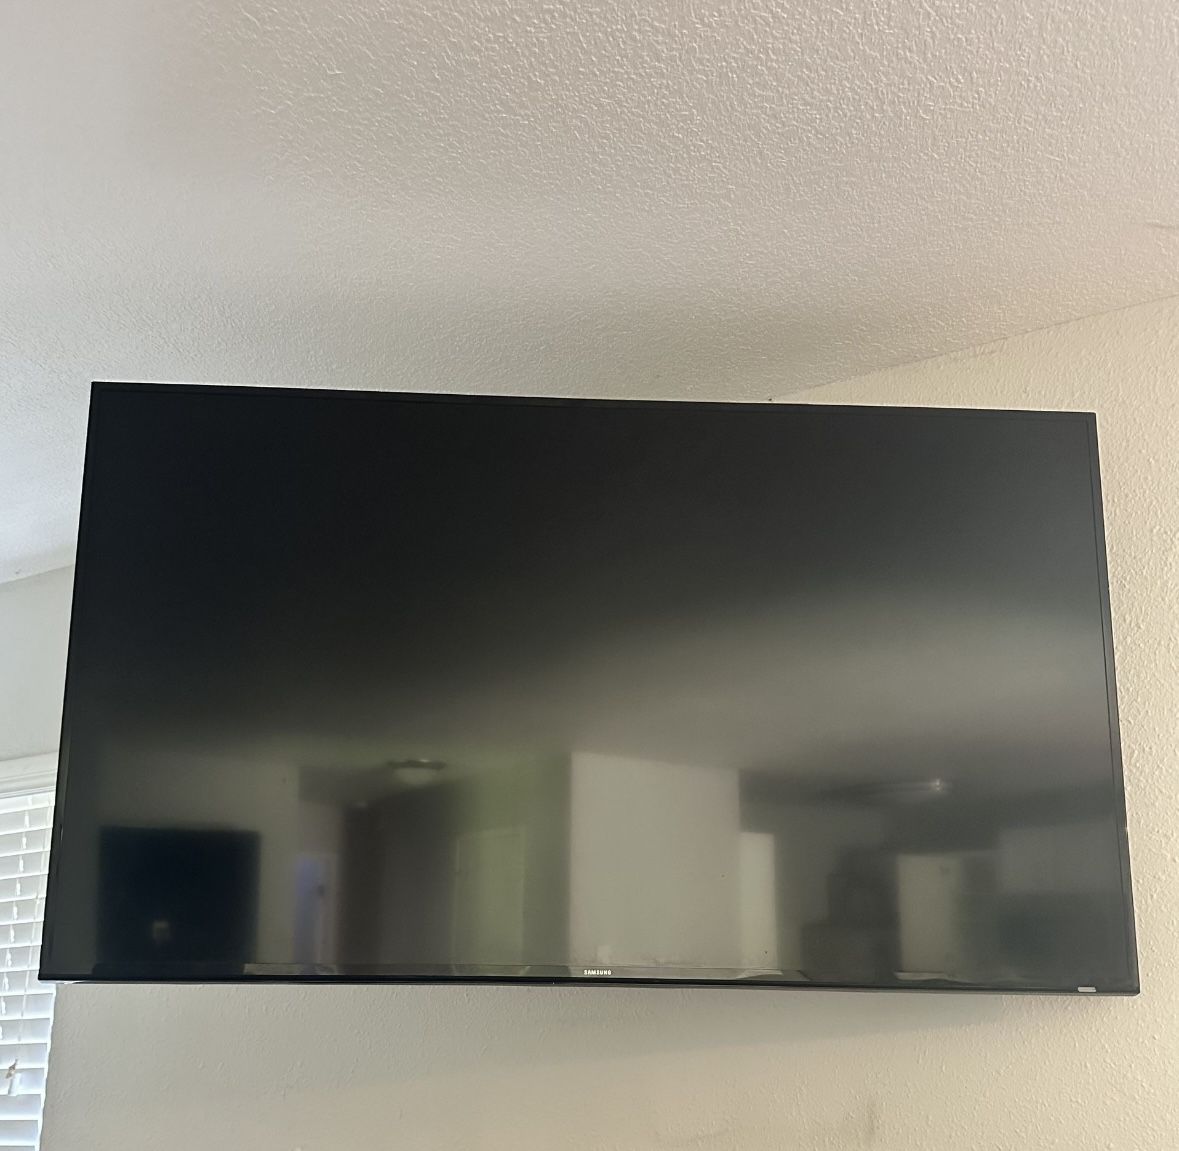 Samsung TV with Stand & Mount